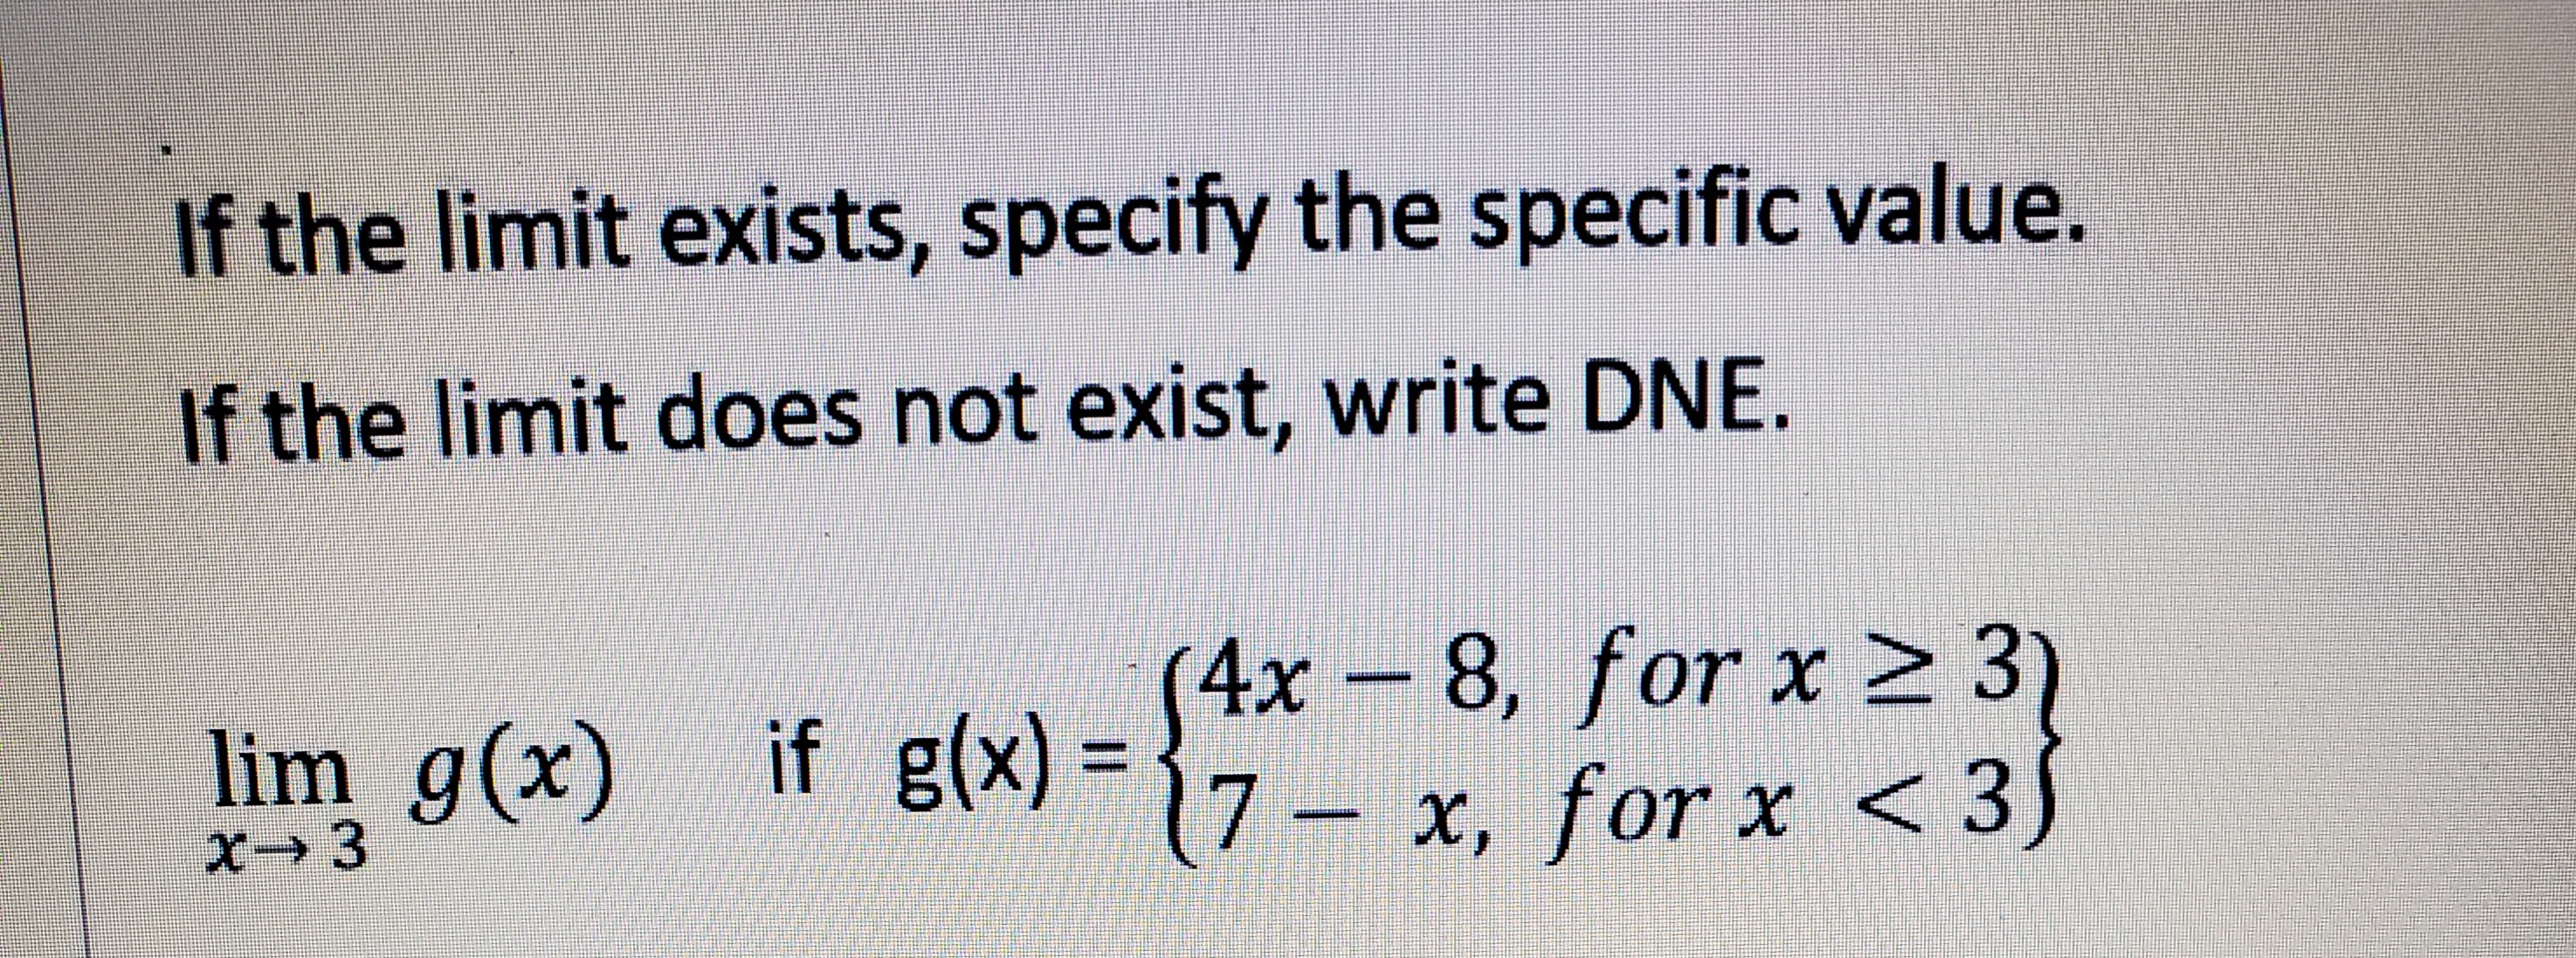 If the limit exists, specify the specific value.
If the limit does not exist, write DNE.
4x- )
8, for x 2 3
lim g(x) if g(x) =
7 – x, for x < 3)
